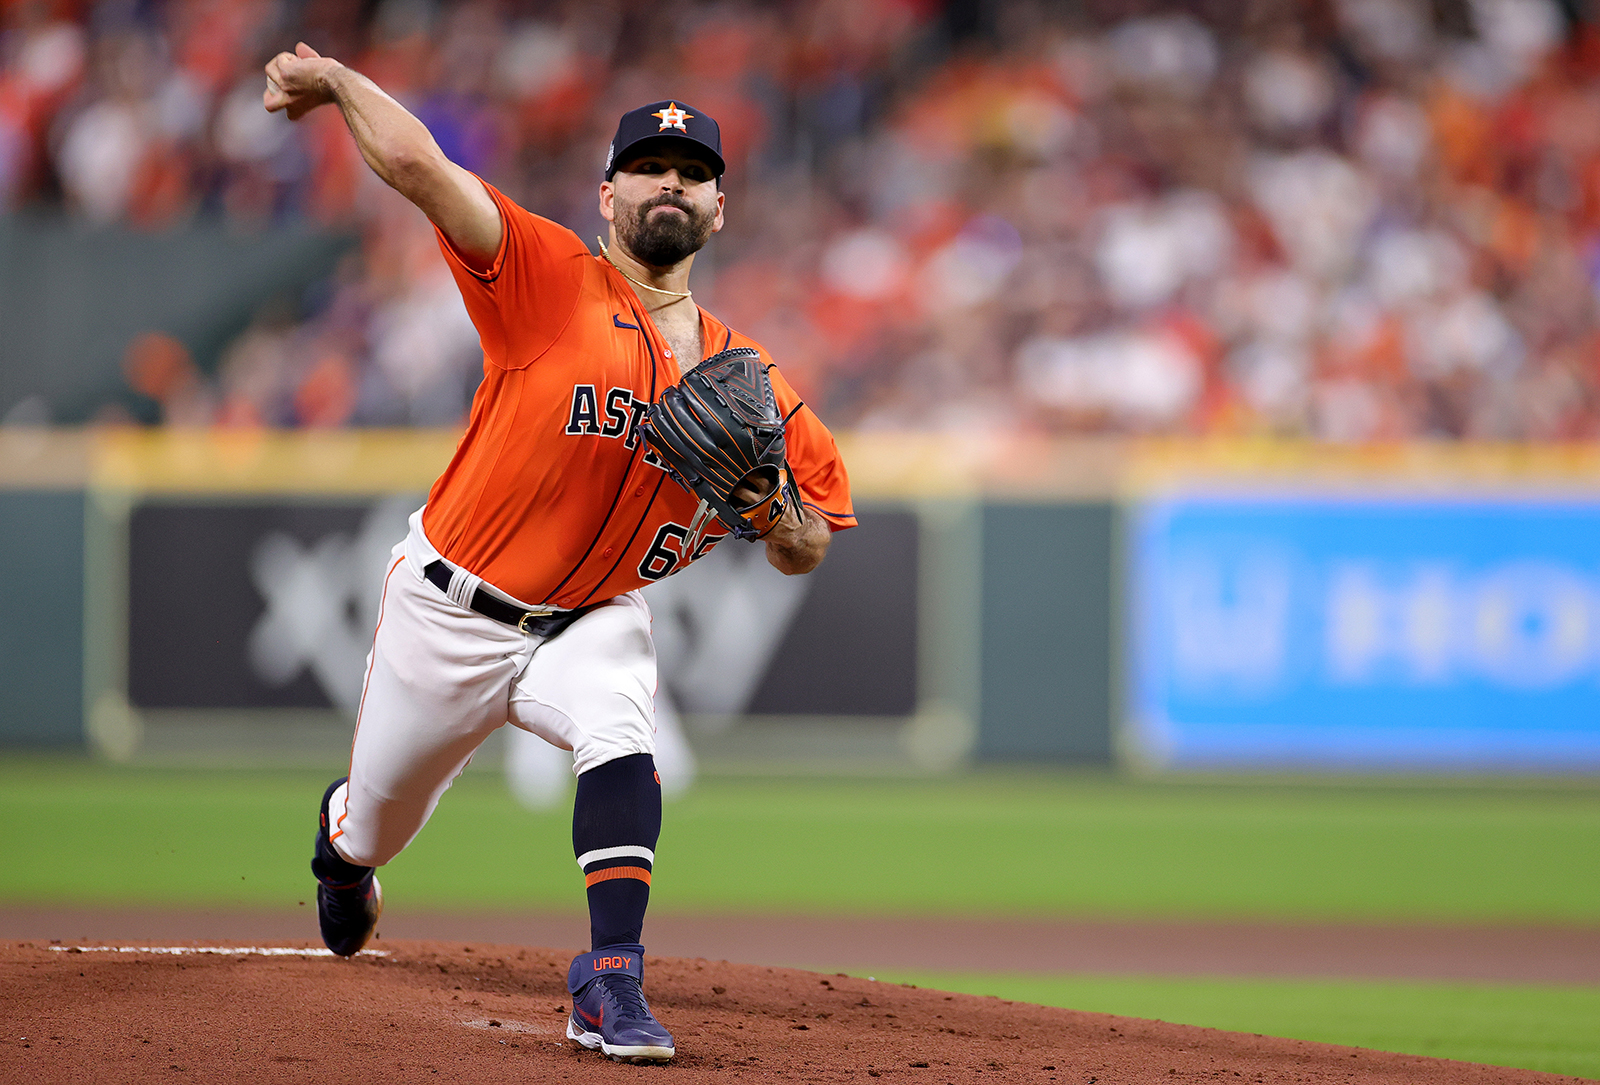 Jose Urquidy of the Houston Astros delivers the pitch against the Atlanta Braves during the first inning in Game Two of the World Series.